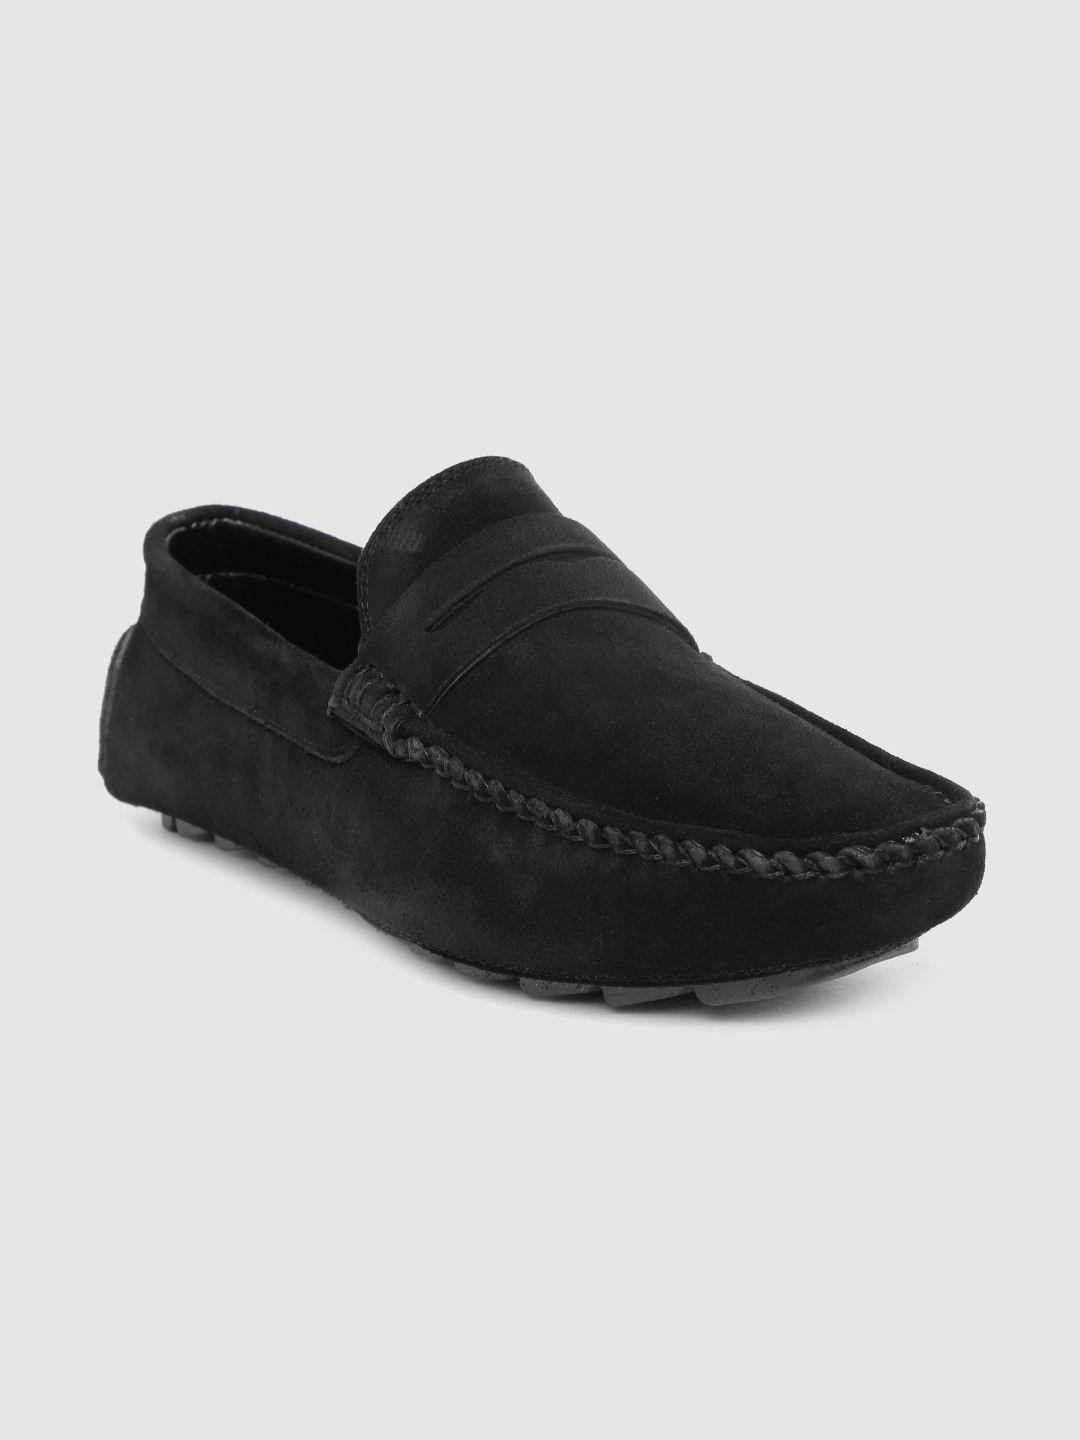 louis-stitch-men-black-solid-handmade-suede-penny-loafers